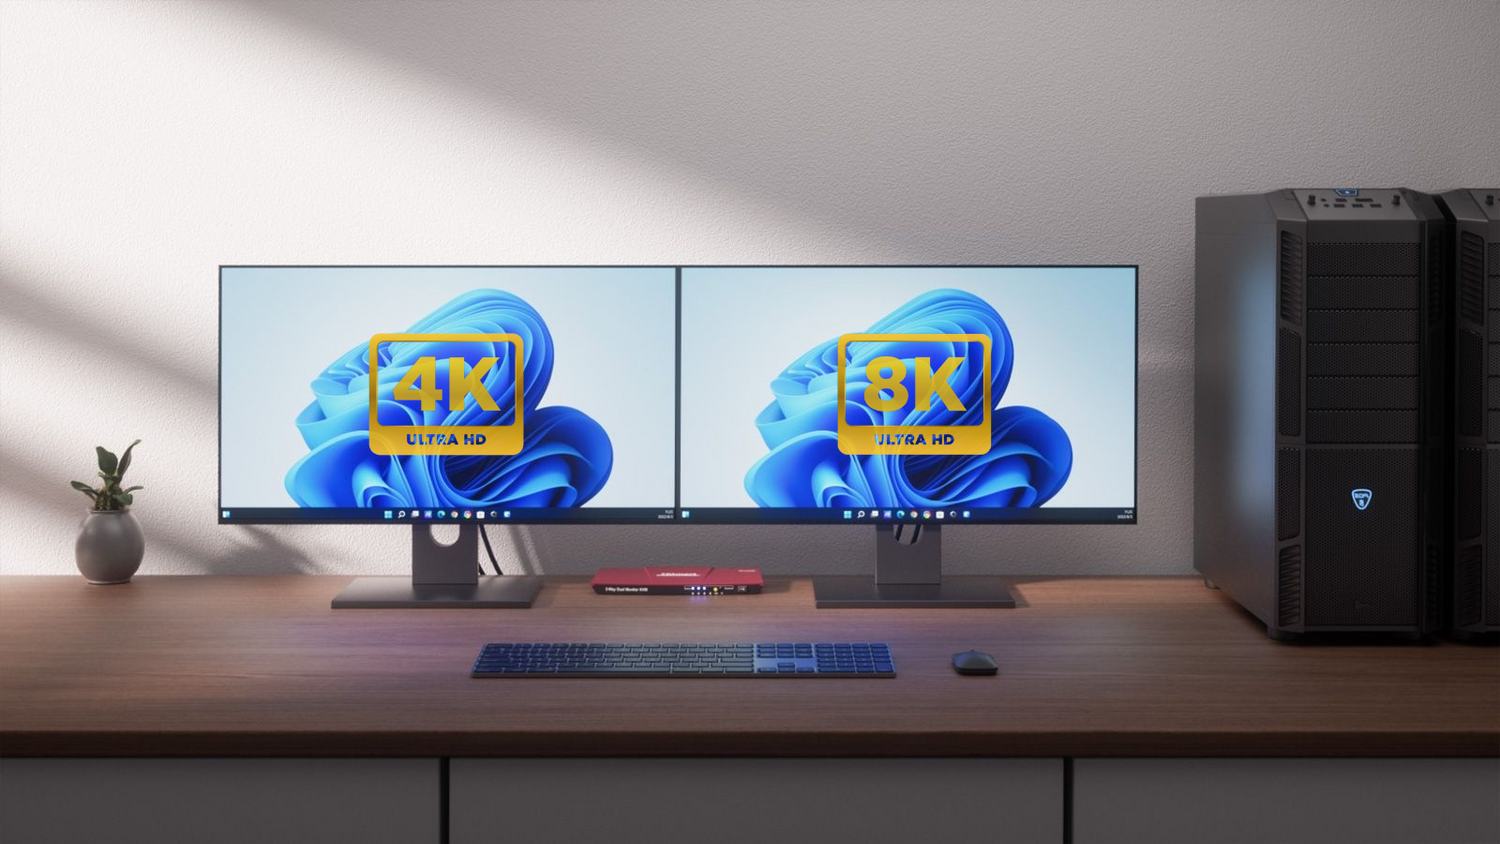 Differences between 4K and 8K